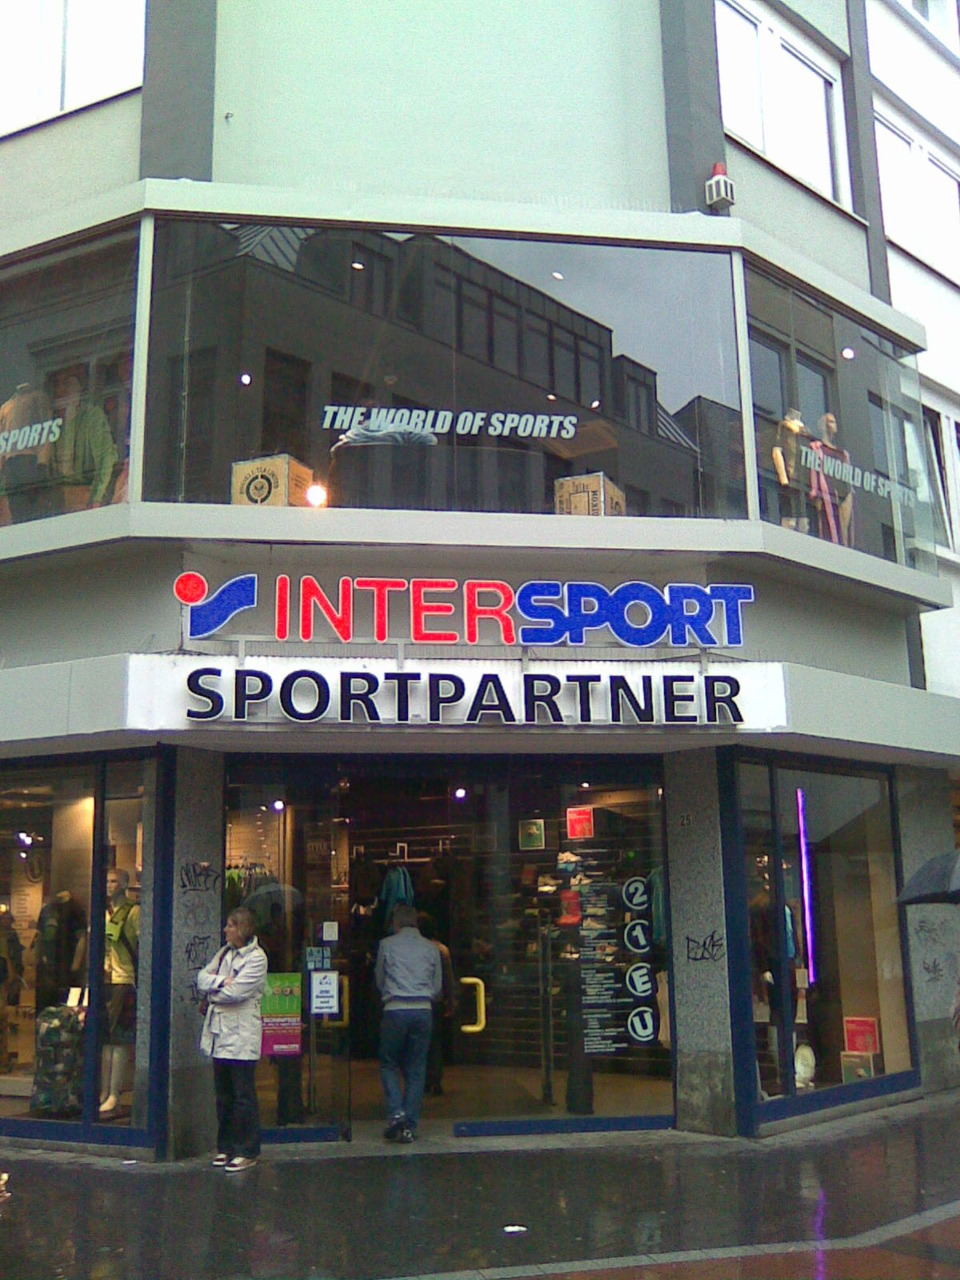 SPOTTED! at Sports Partner in Bonn, Germany by reader Daniel